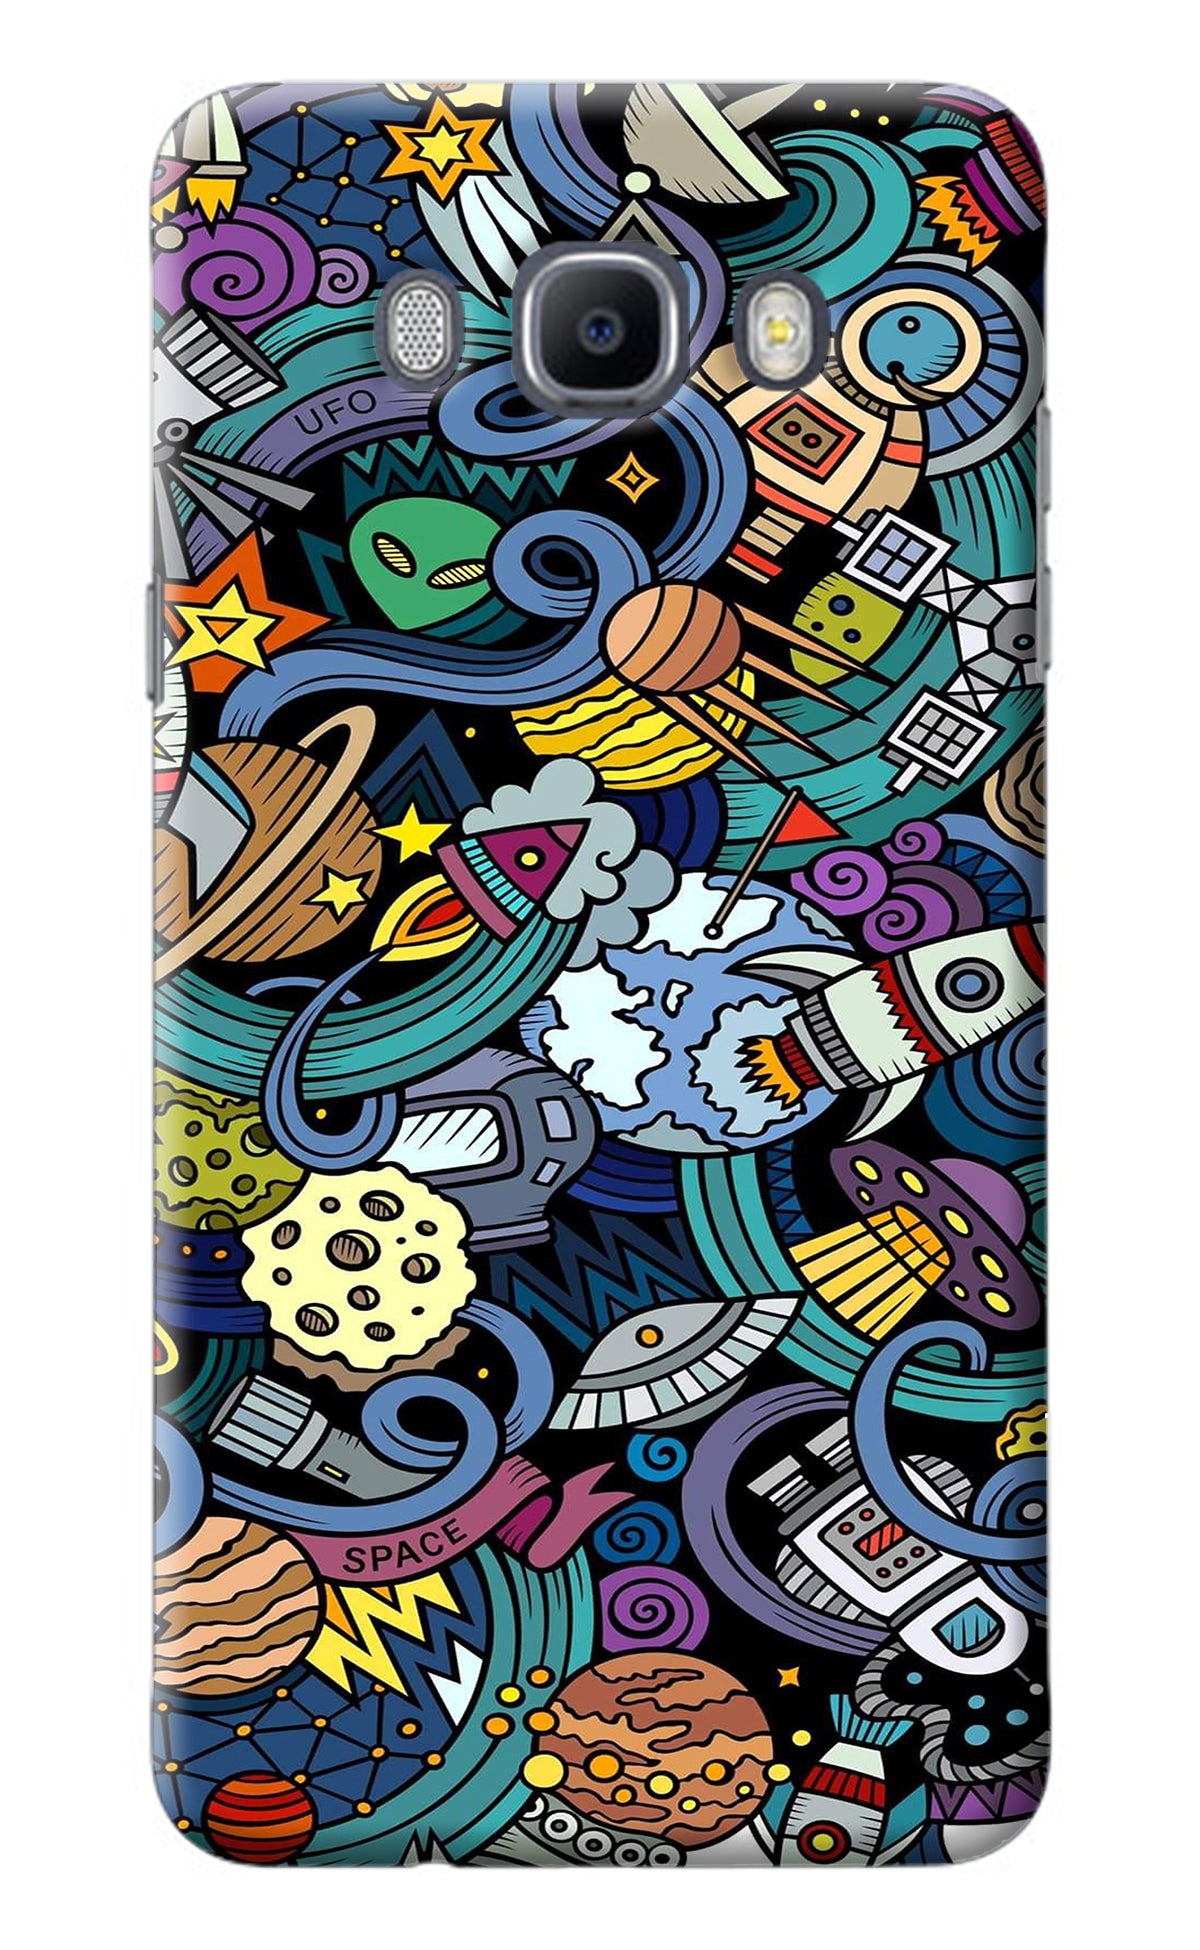 Space Abstract Samsung J7 2016 Back Cover